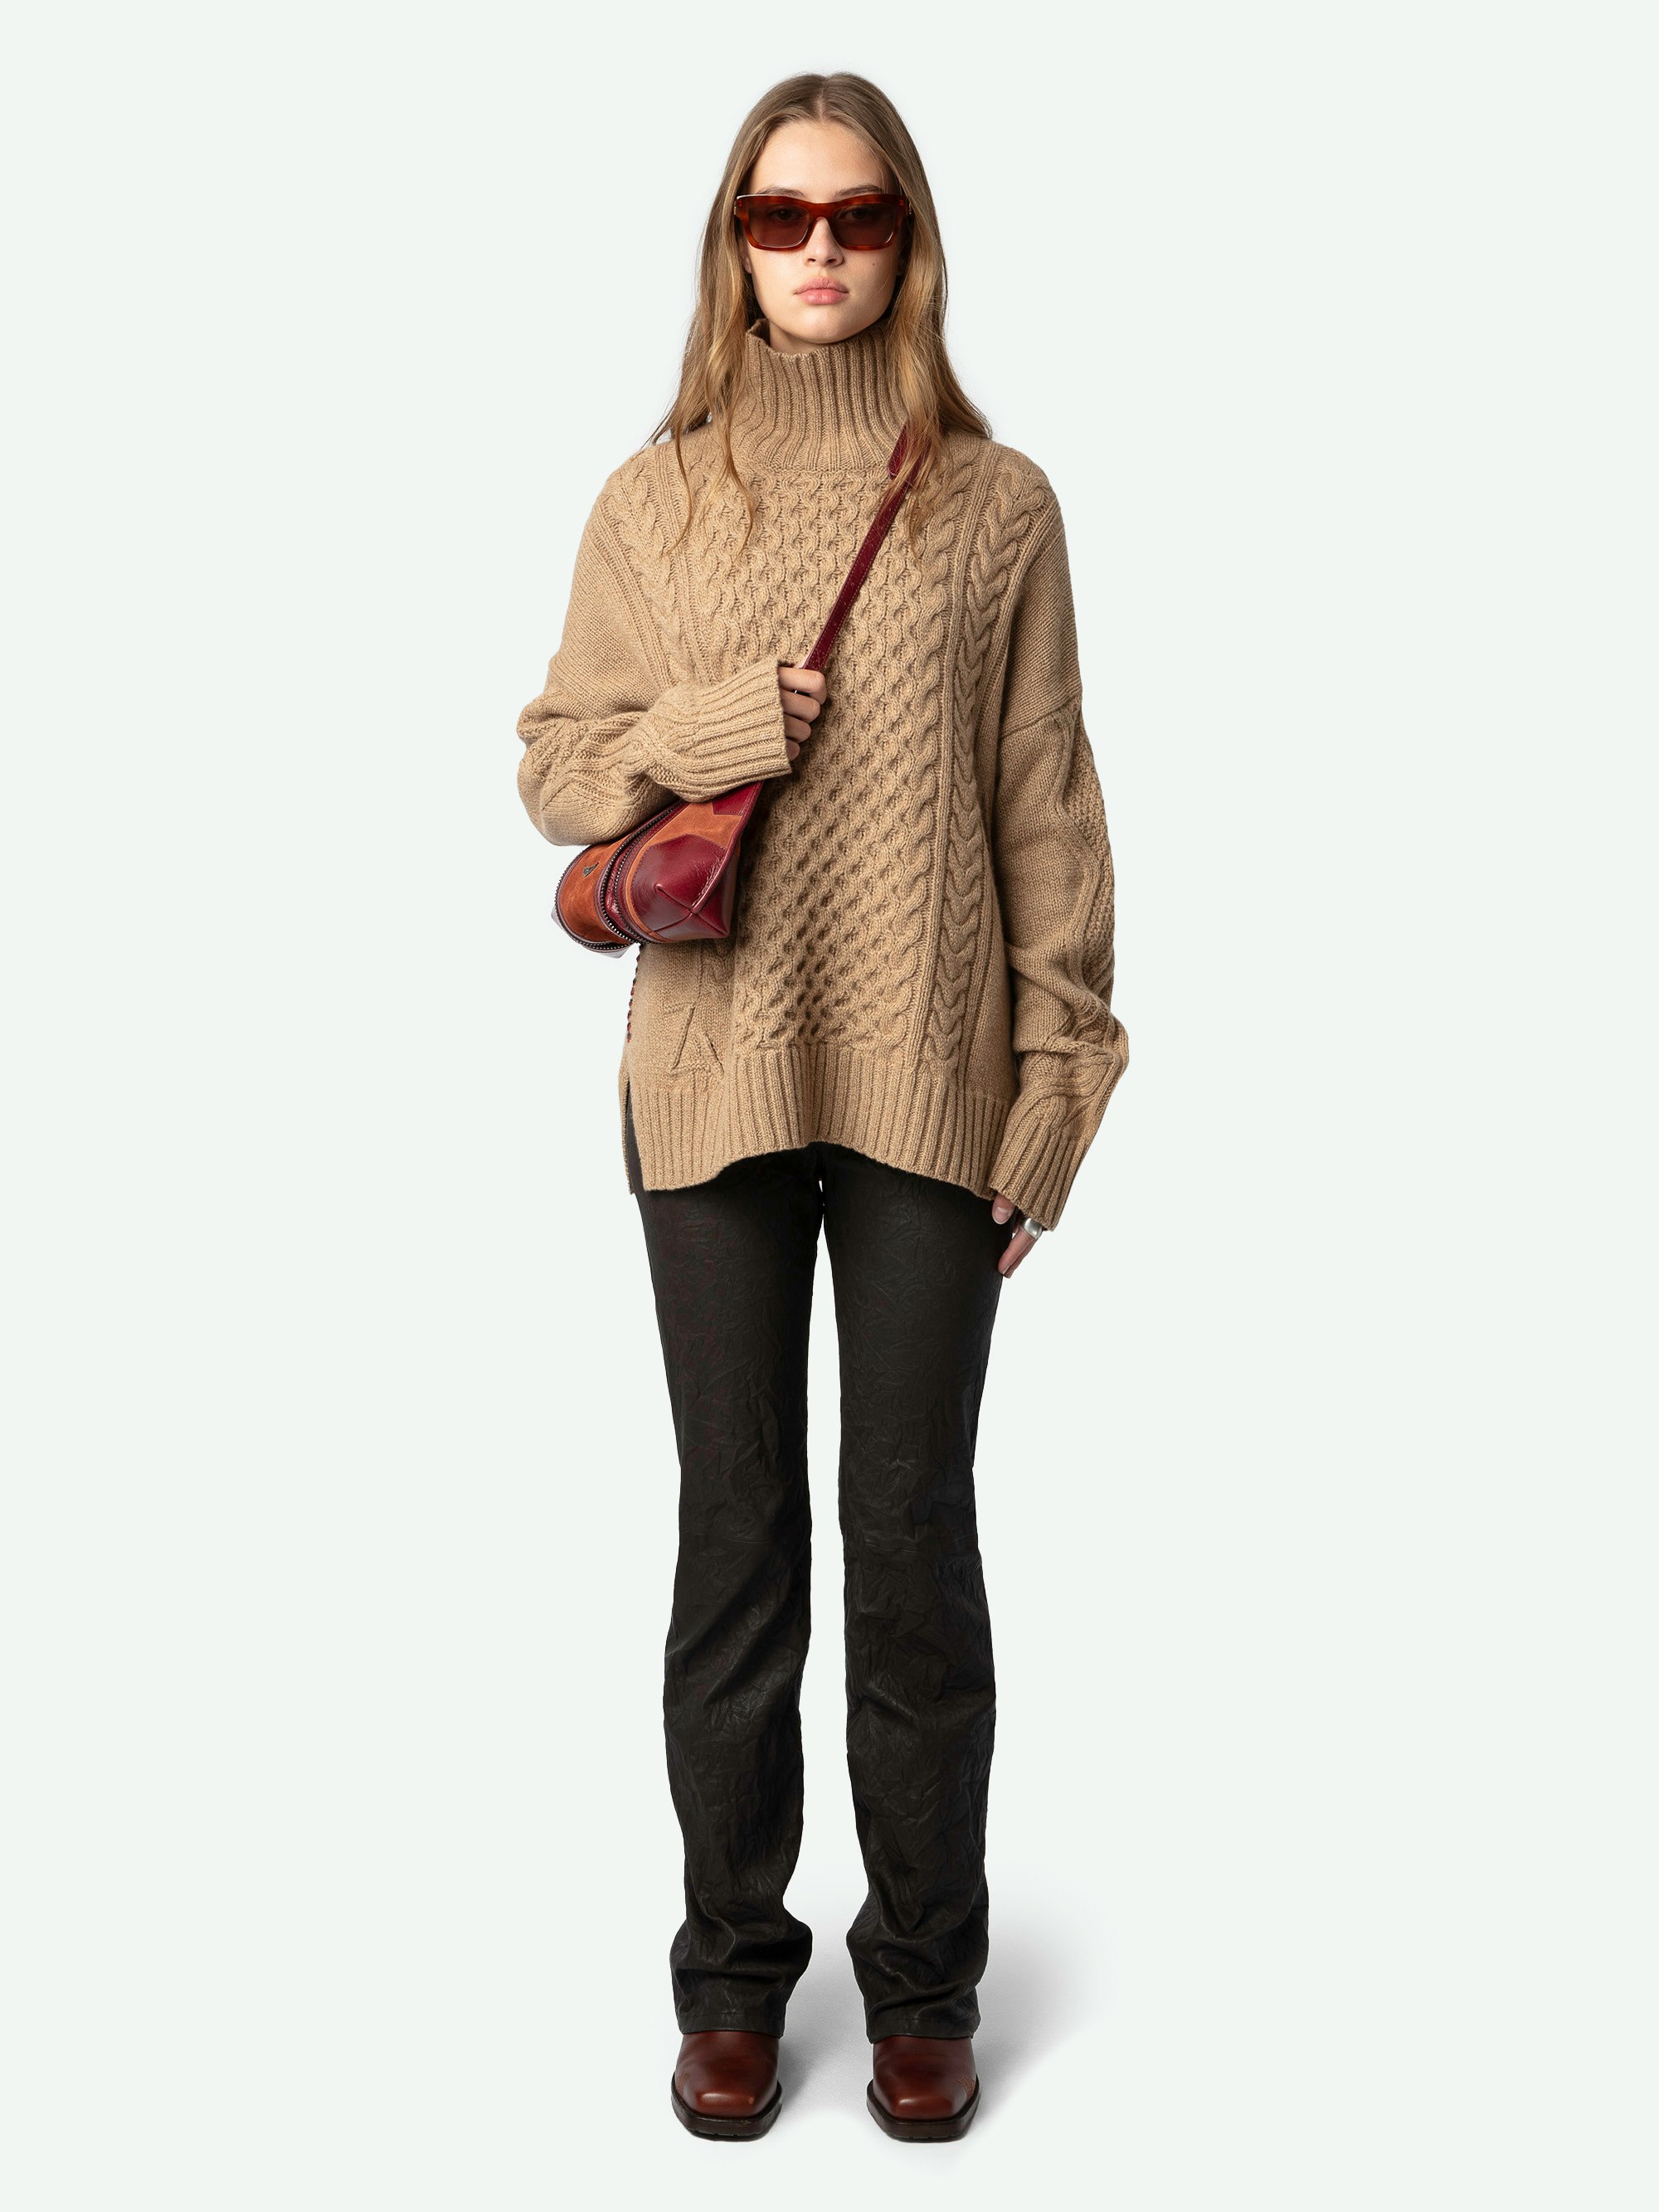 Alma Jumper - Long, loose-fitting jumper in brown knit with funnel neck, twists, embroidery on the sides and wing motifs on the back.